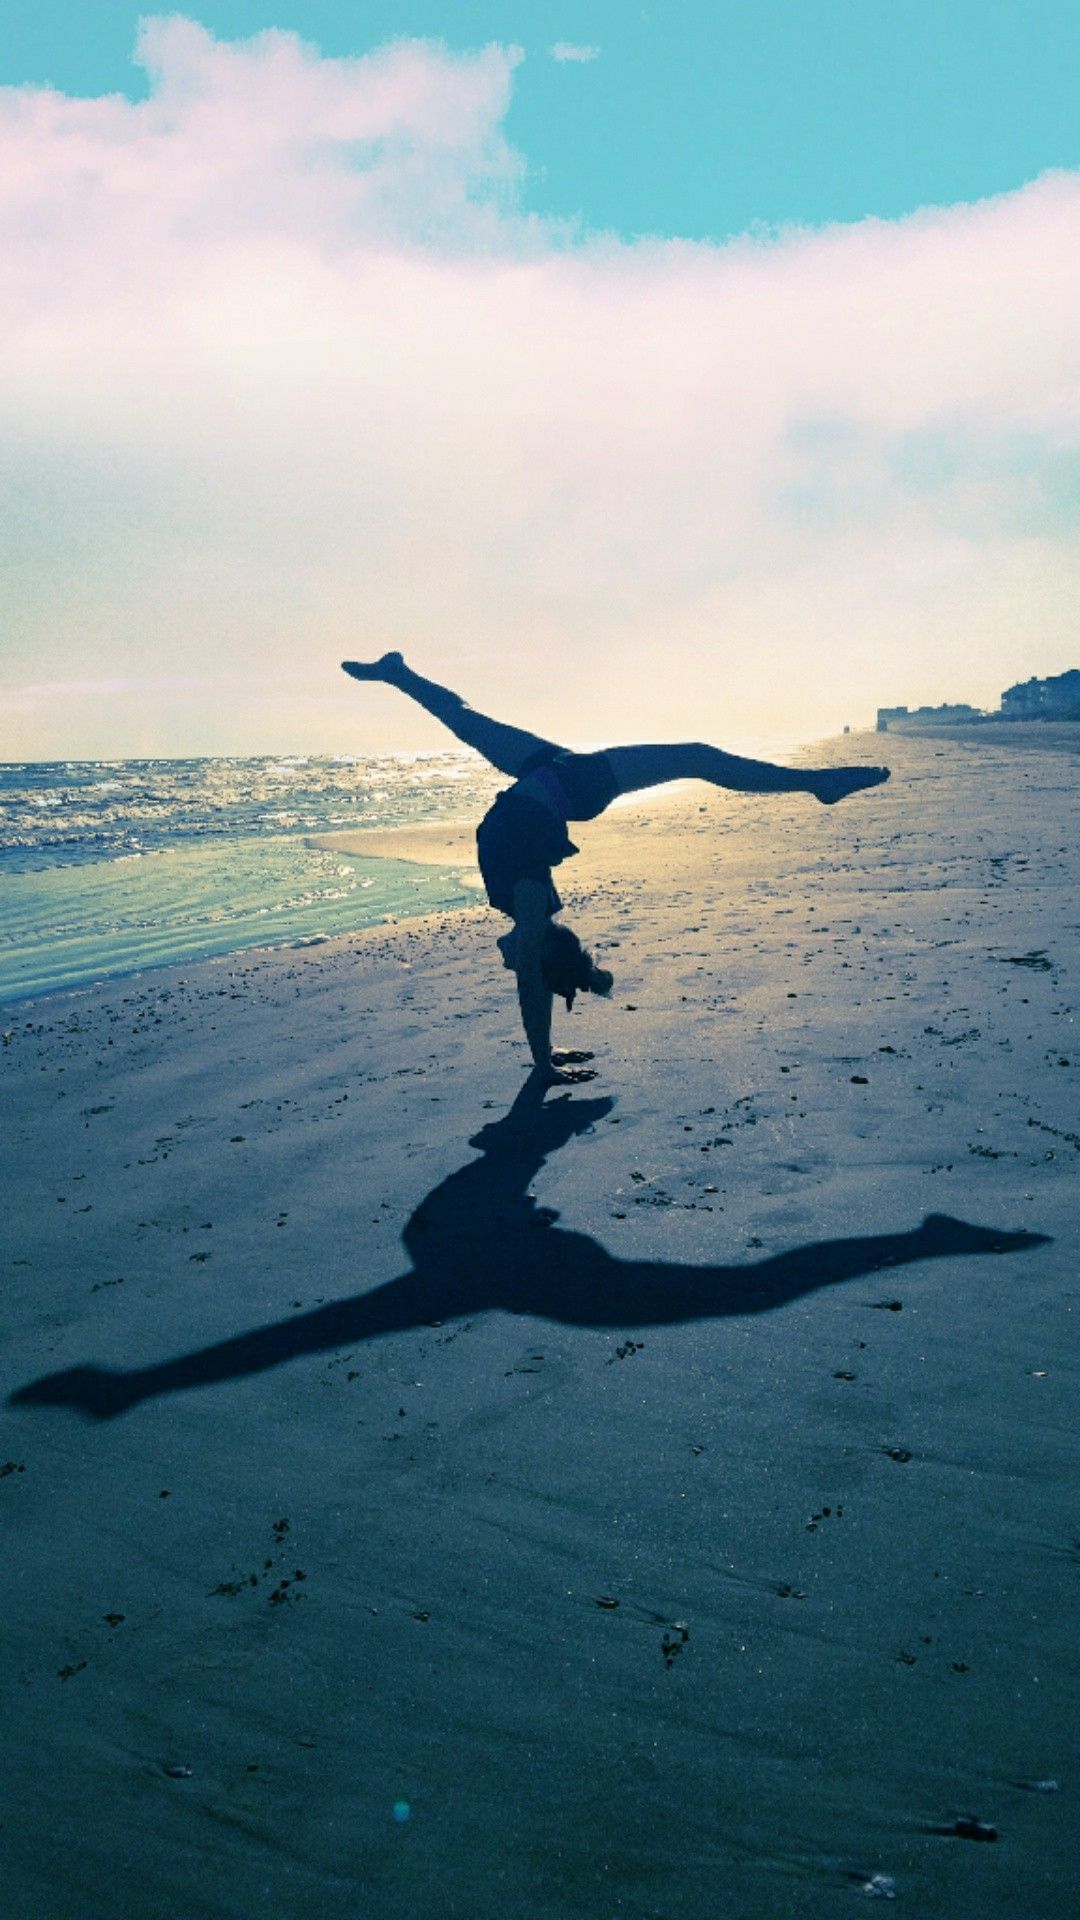 A person doing a handstand on the beach with the ocean in the background. The person is casting a long shadow on the sand. - Gymnastics